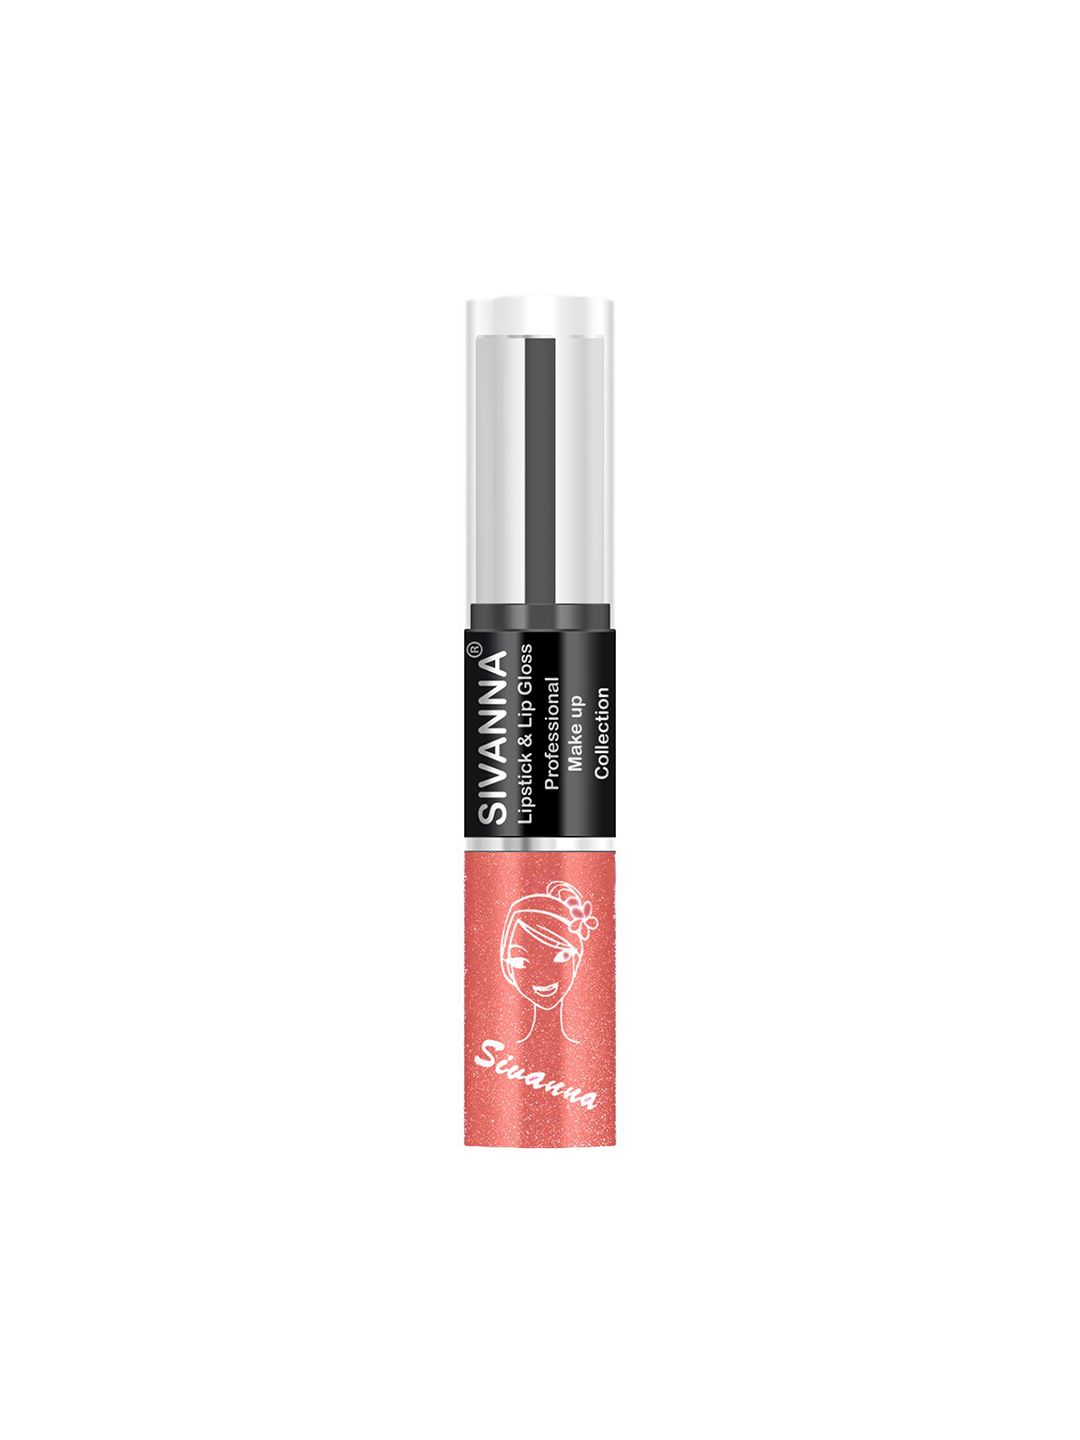 Sivanna Colors 2-in-1 Professional Makeup Lipstick & Lip Gloss - DK061 18 Price in India